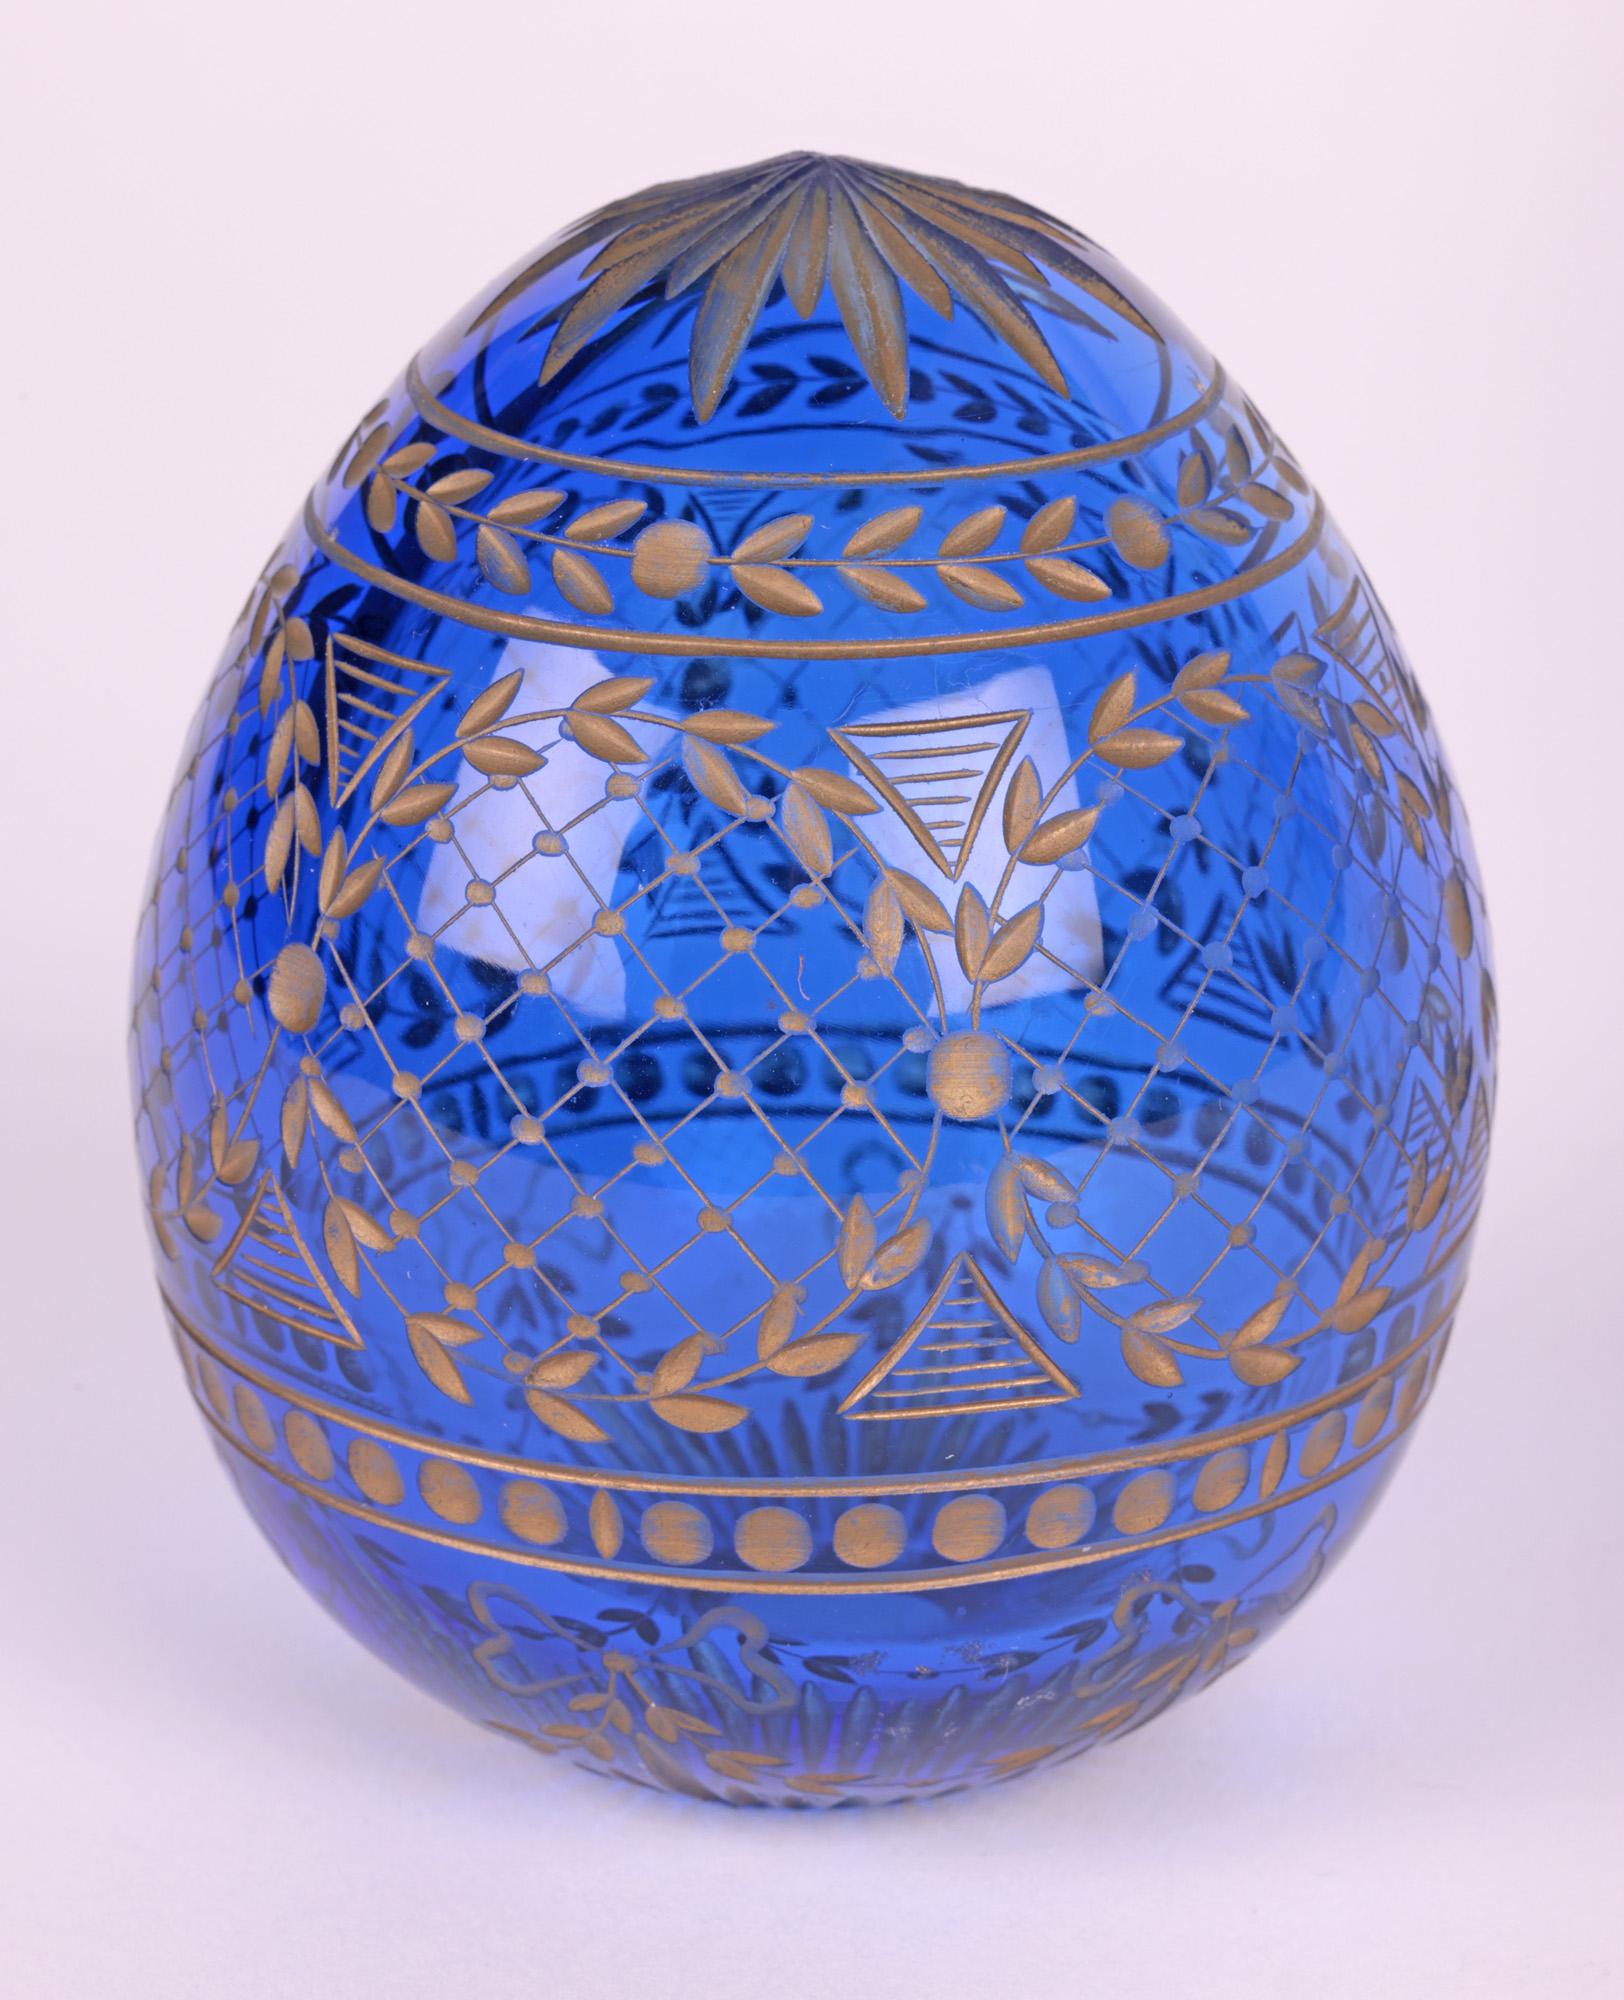 Russian Faberge Attributed Blue Glass Egg with Engraved Designs In Good Condition For Sale In Bishop's Stortford, Hertfordshire